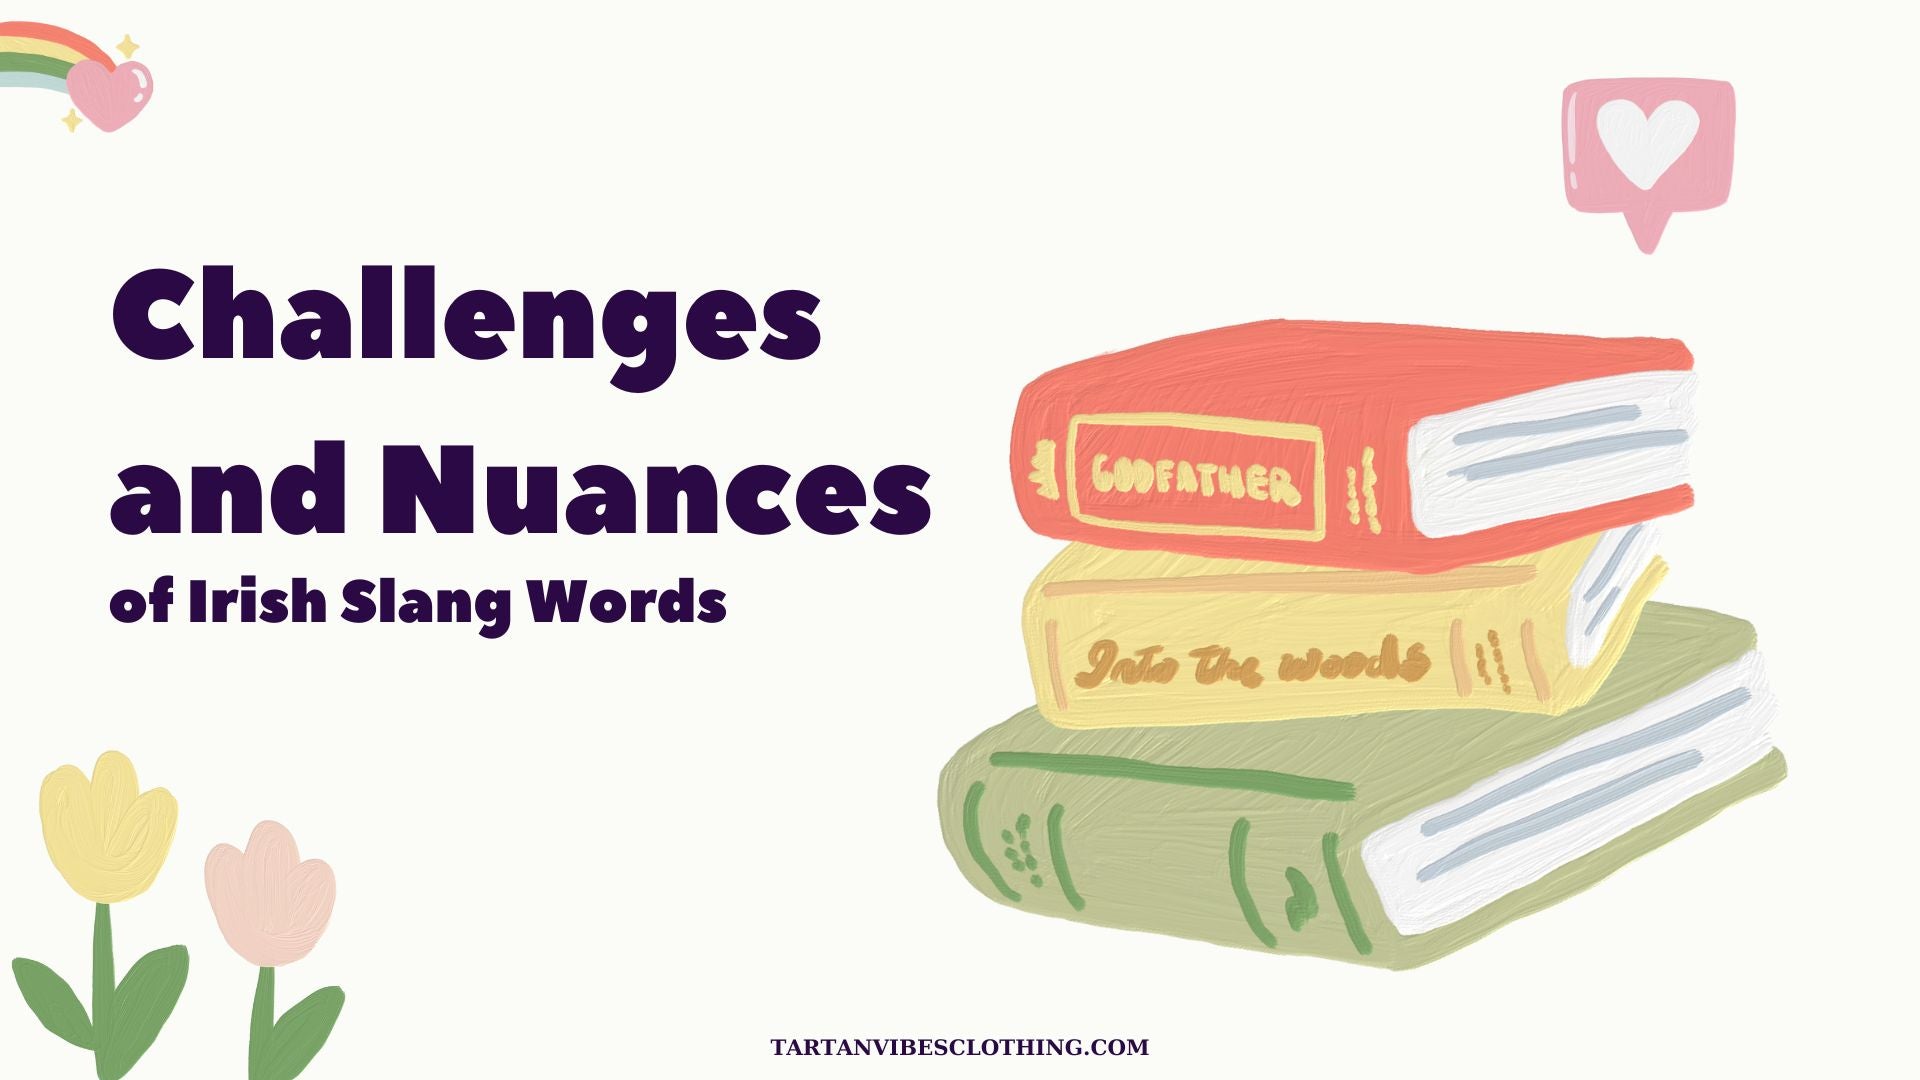 Challenges and Nuances of Irish Slang Words